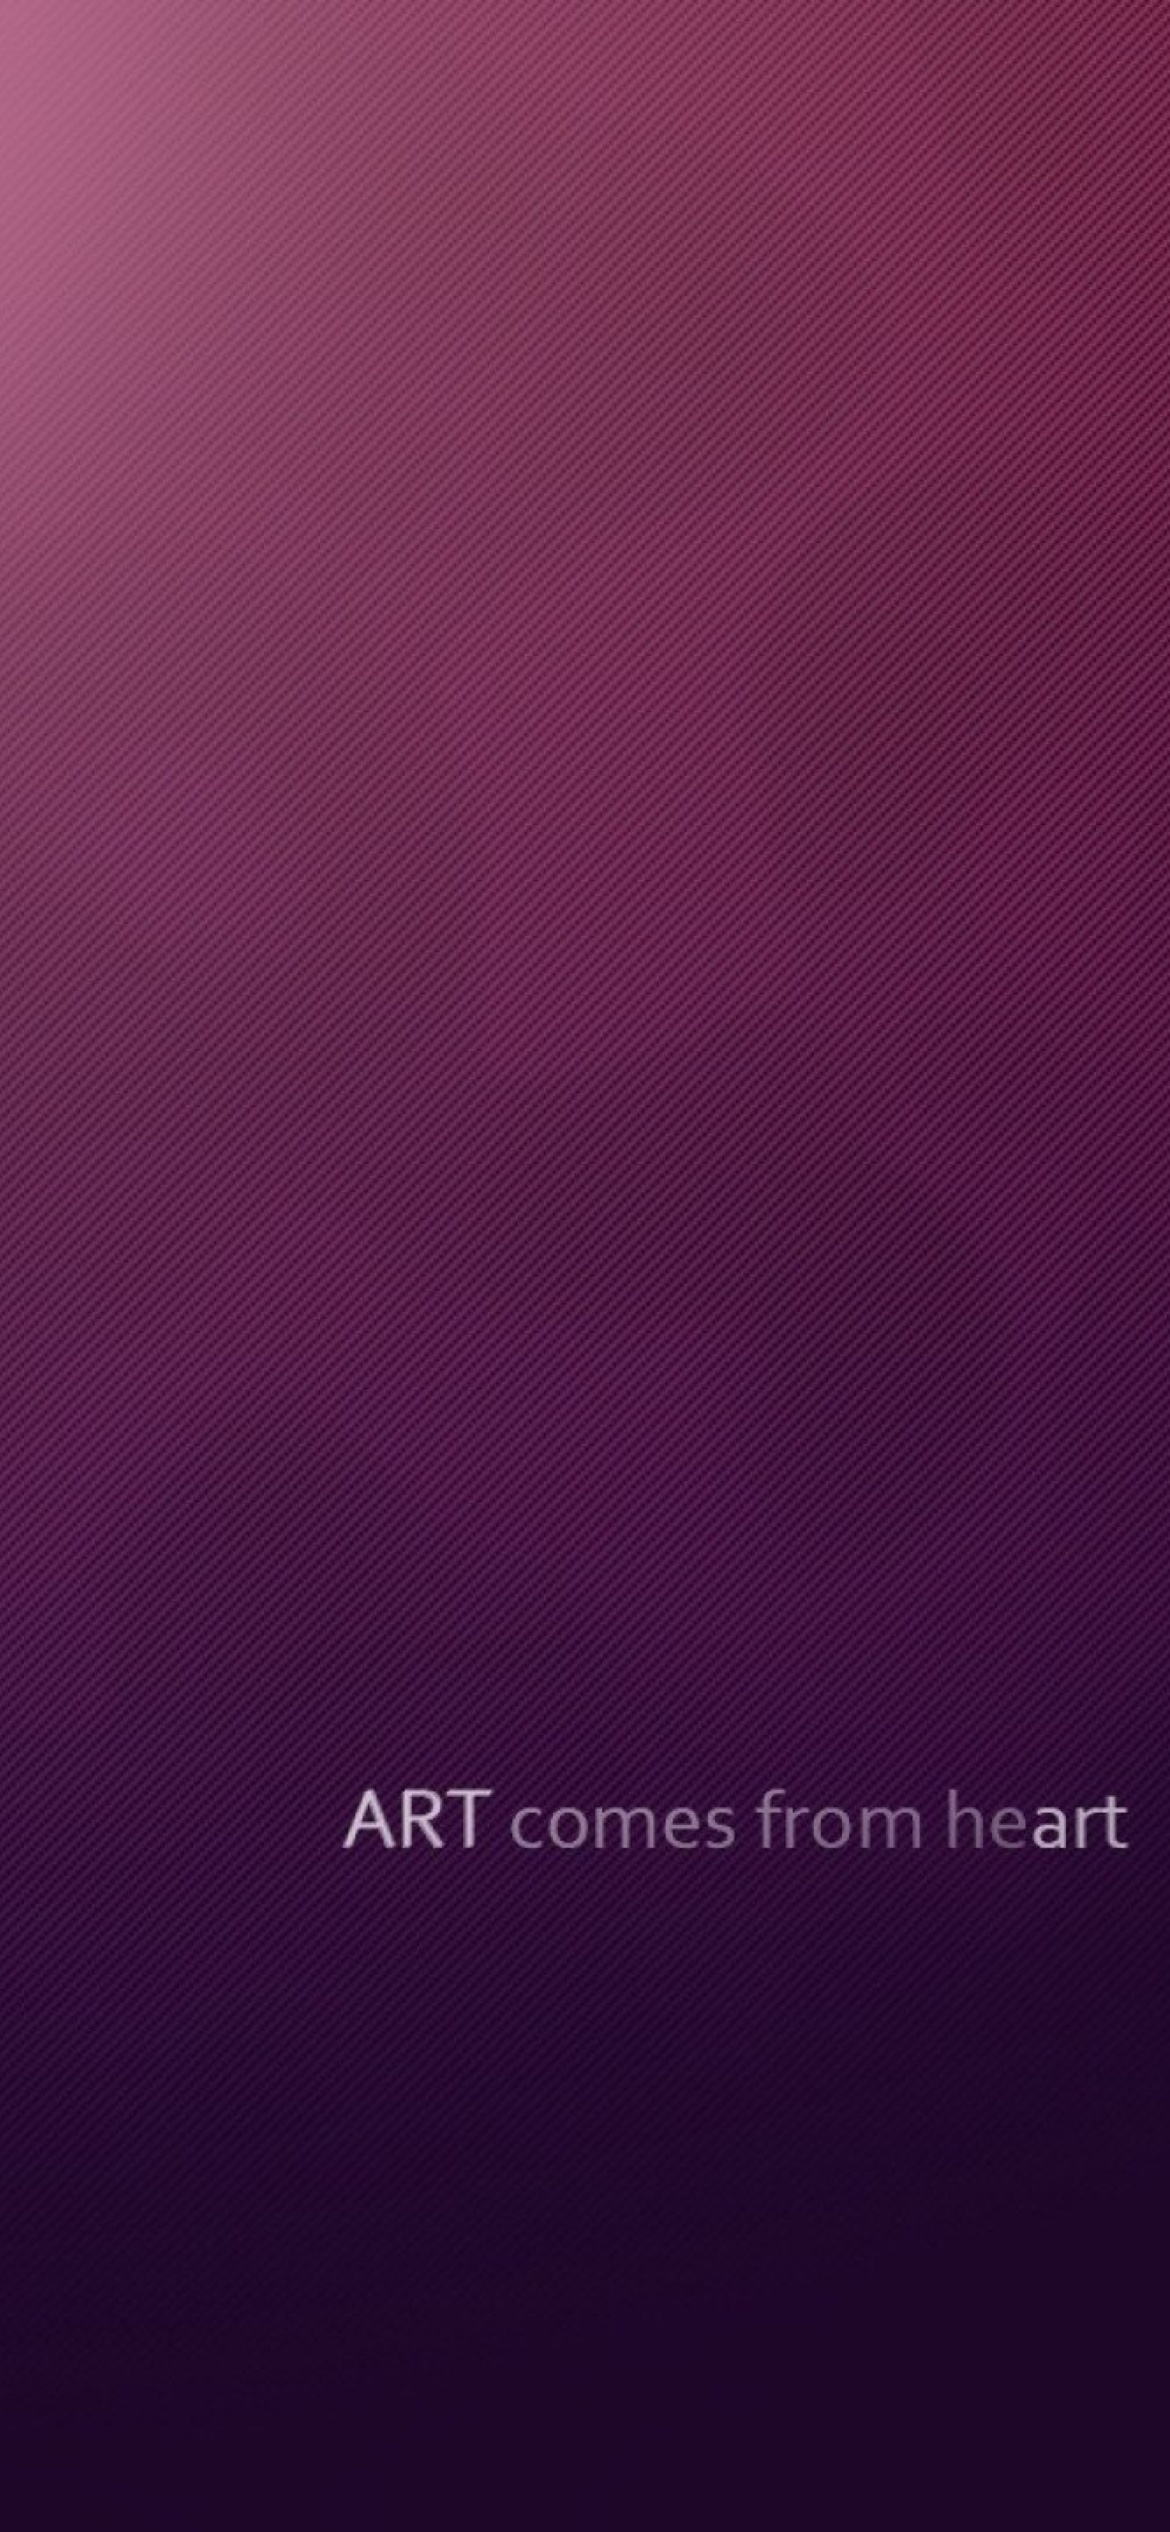 Simple Texture, Art comes from Heart wallpaper 1170x2532